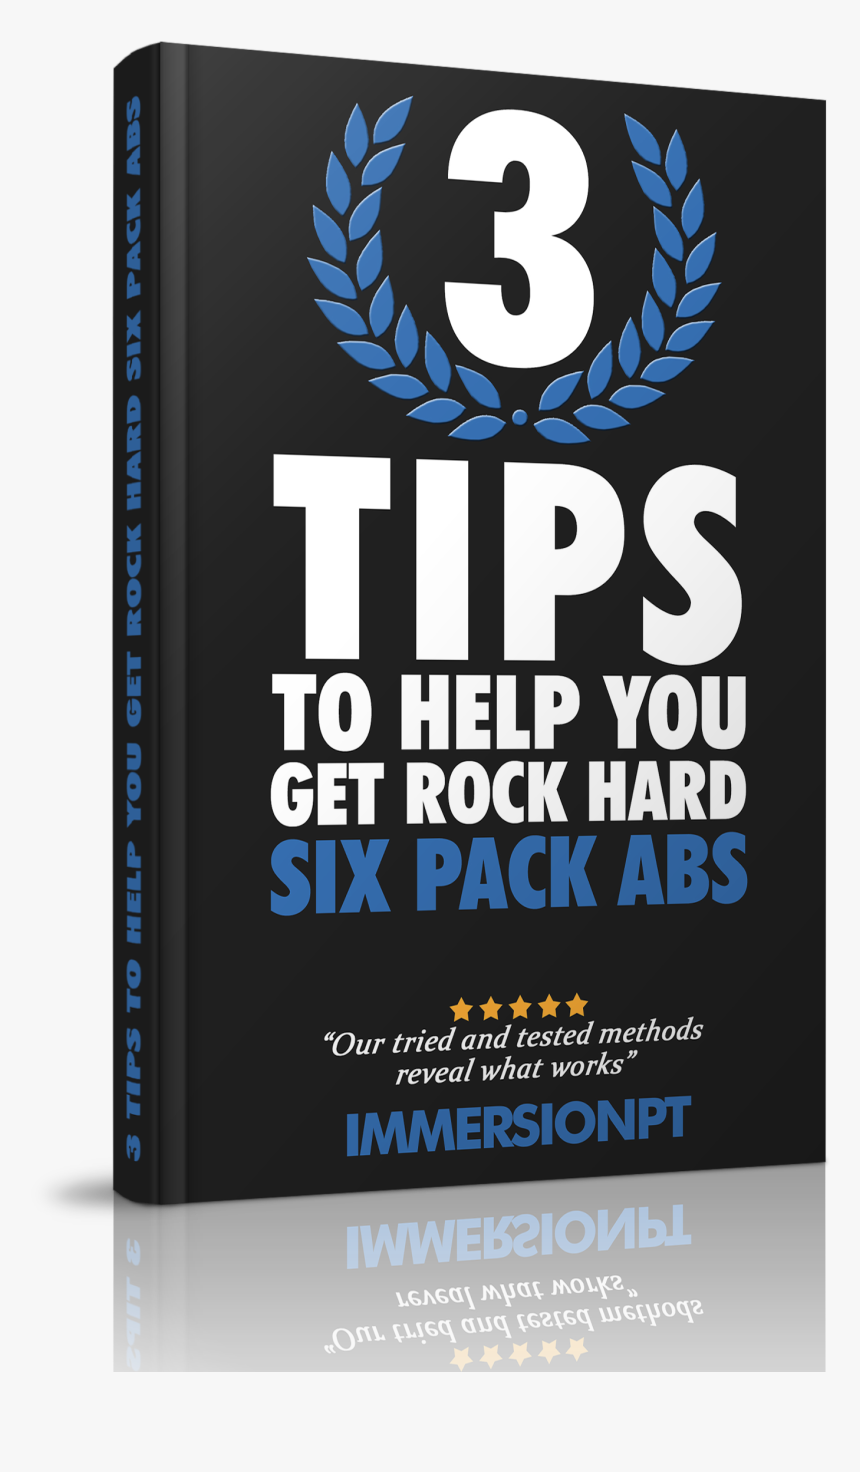 Immersion Pt 3 Tips To Help You Get Rock Hard Pack - Brunei, HD Png Download, Free Download